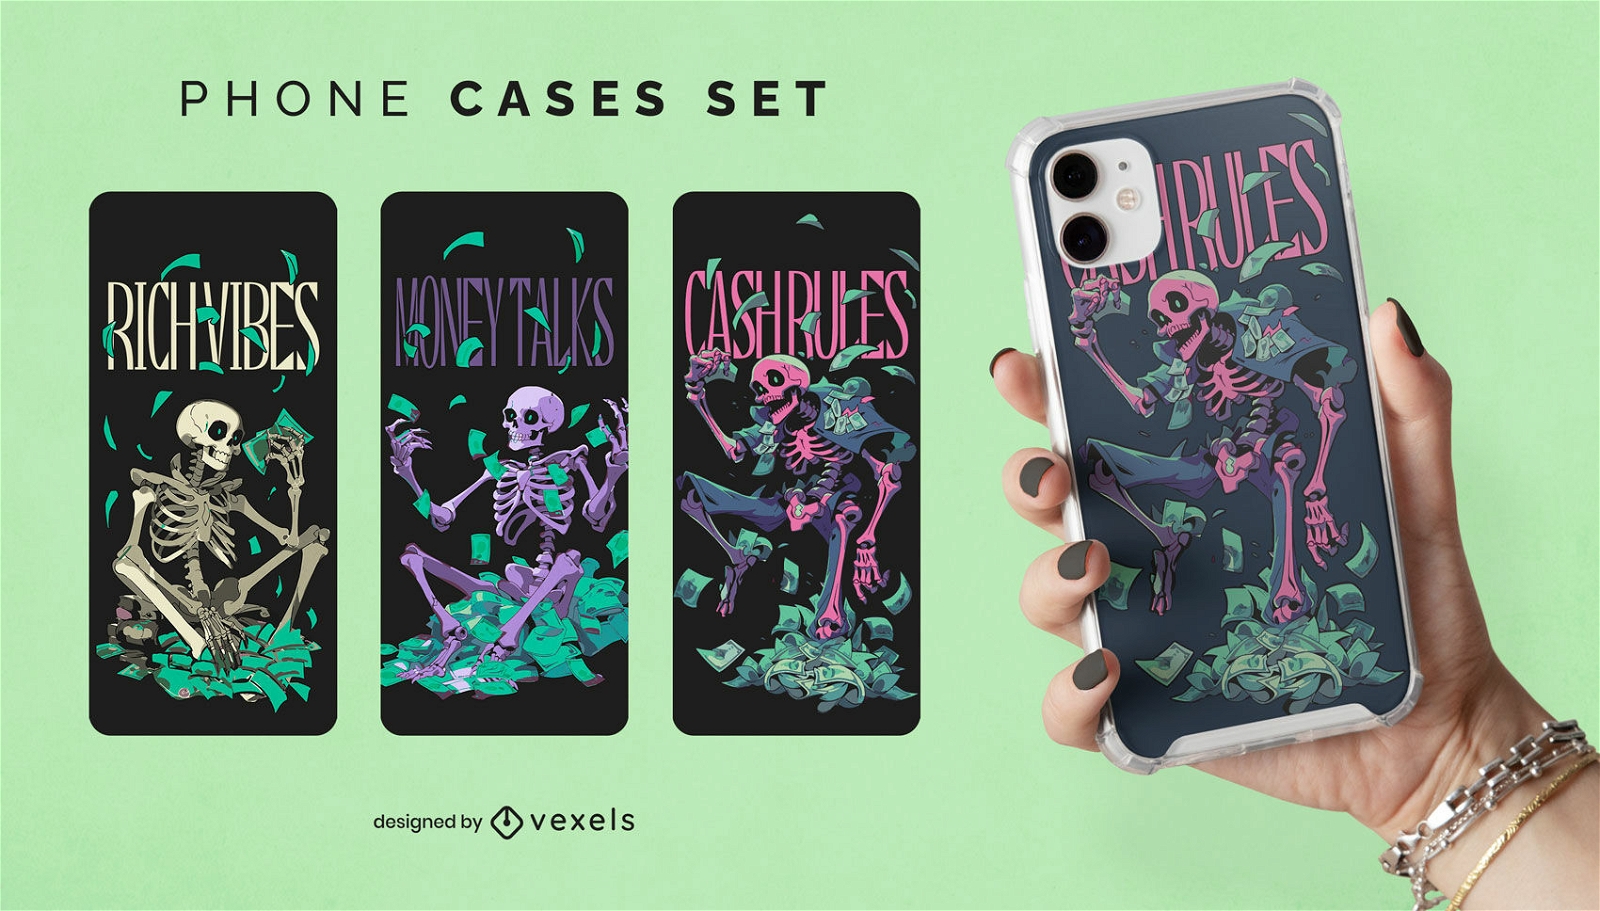 Skeletons with money phone cases set